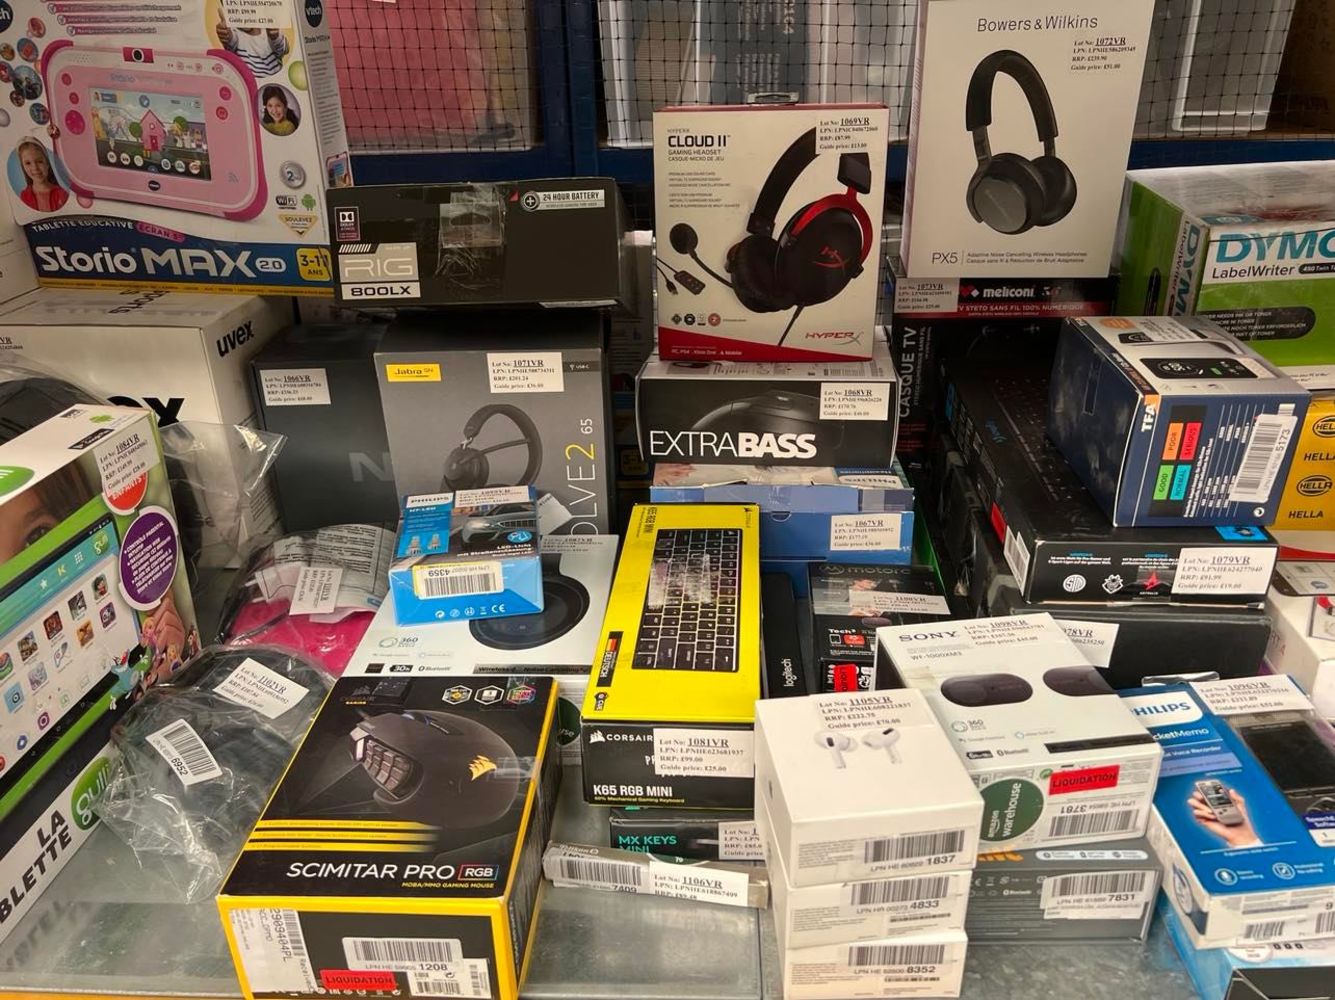 No Reserve !Sale Up to 90%! Amazon Raw Returns ! Samsung, Hp, Bose, Grohe, Sonos, Beats, Razor, Levoit ! Scooters, Toners, Headphones, Watches !